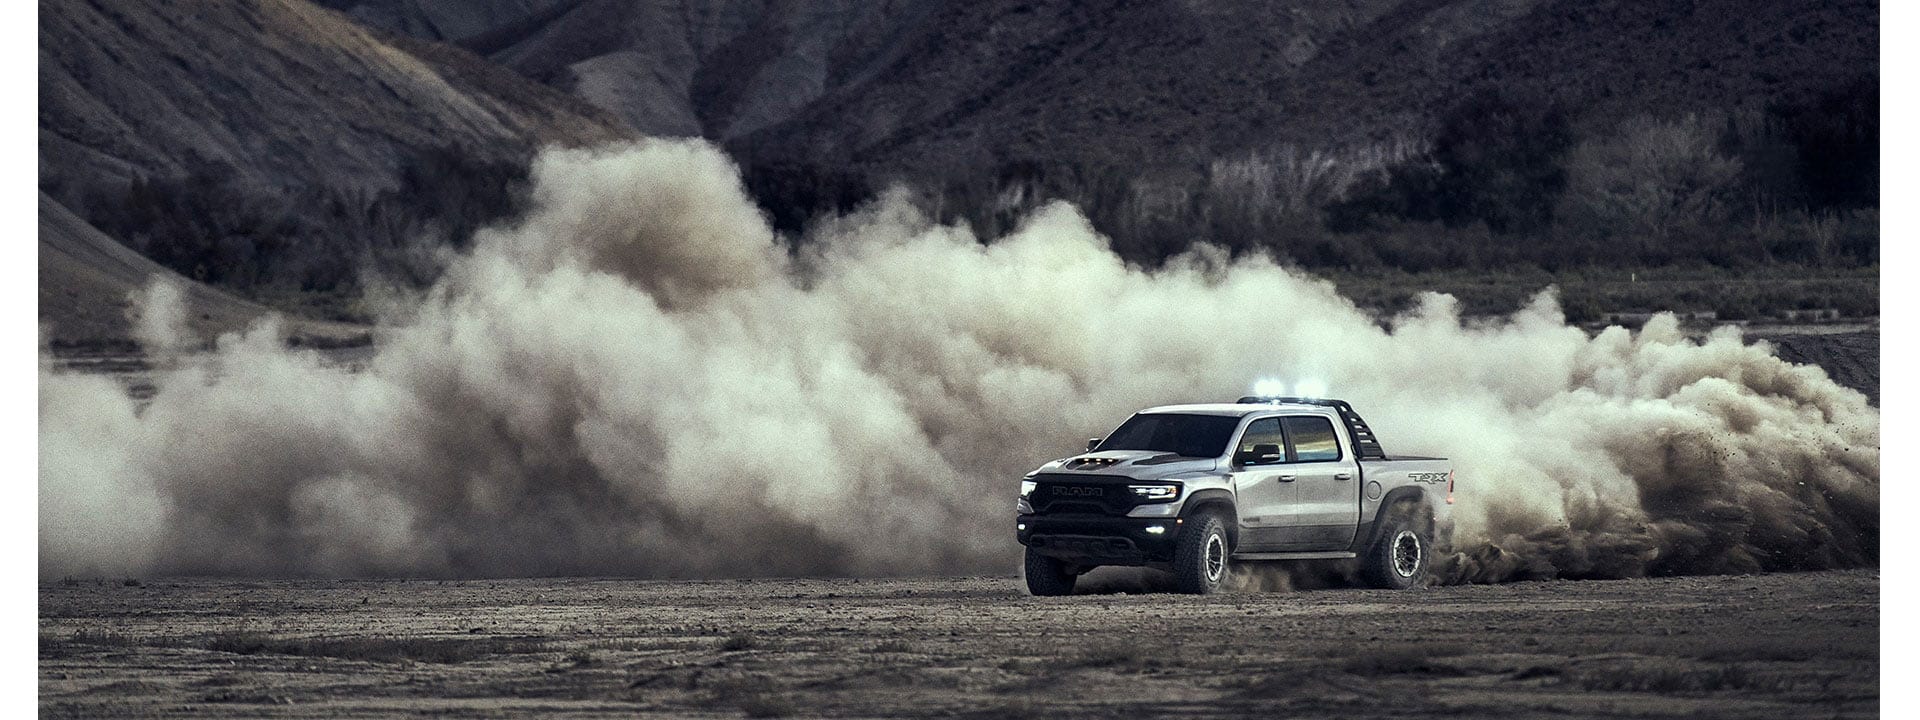 The 2021 Ram 1500 TRX just after a turn, creating a circular dust cloud in its wake.